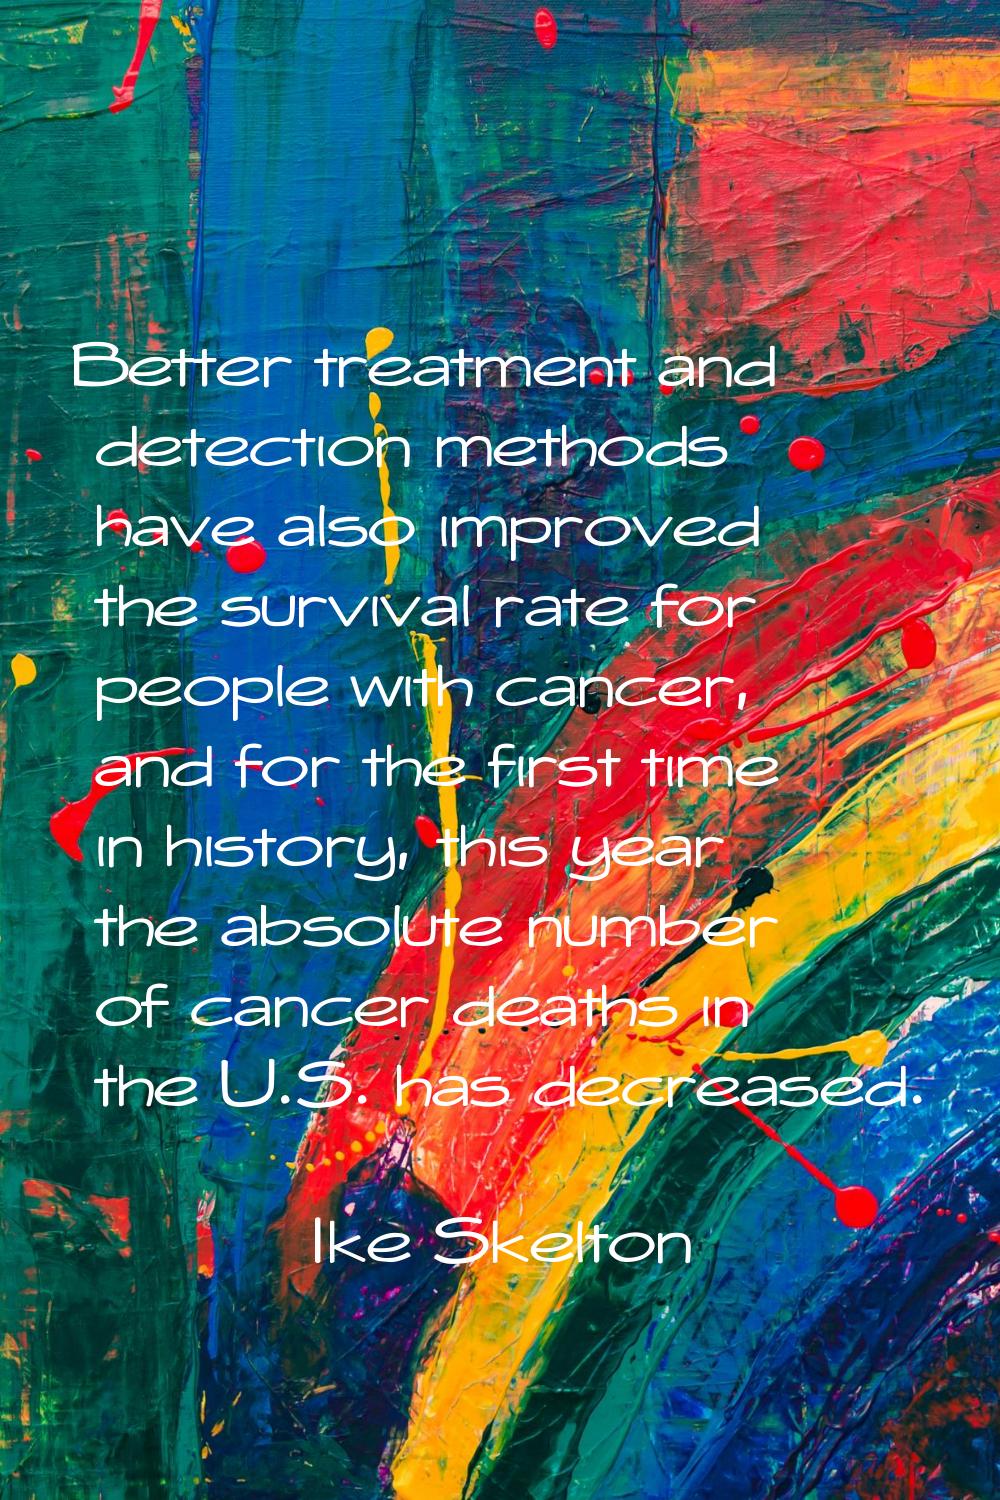 Better treatment and detection methods have also improved the survival rate for people with cancer,